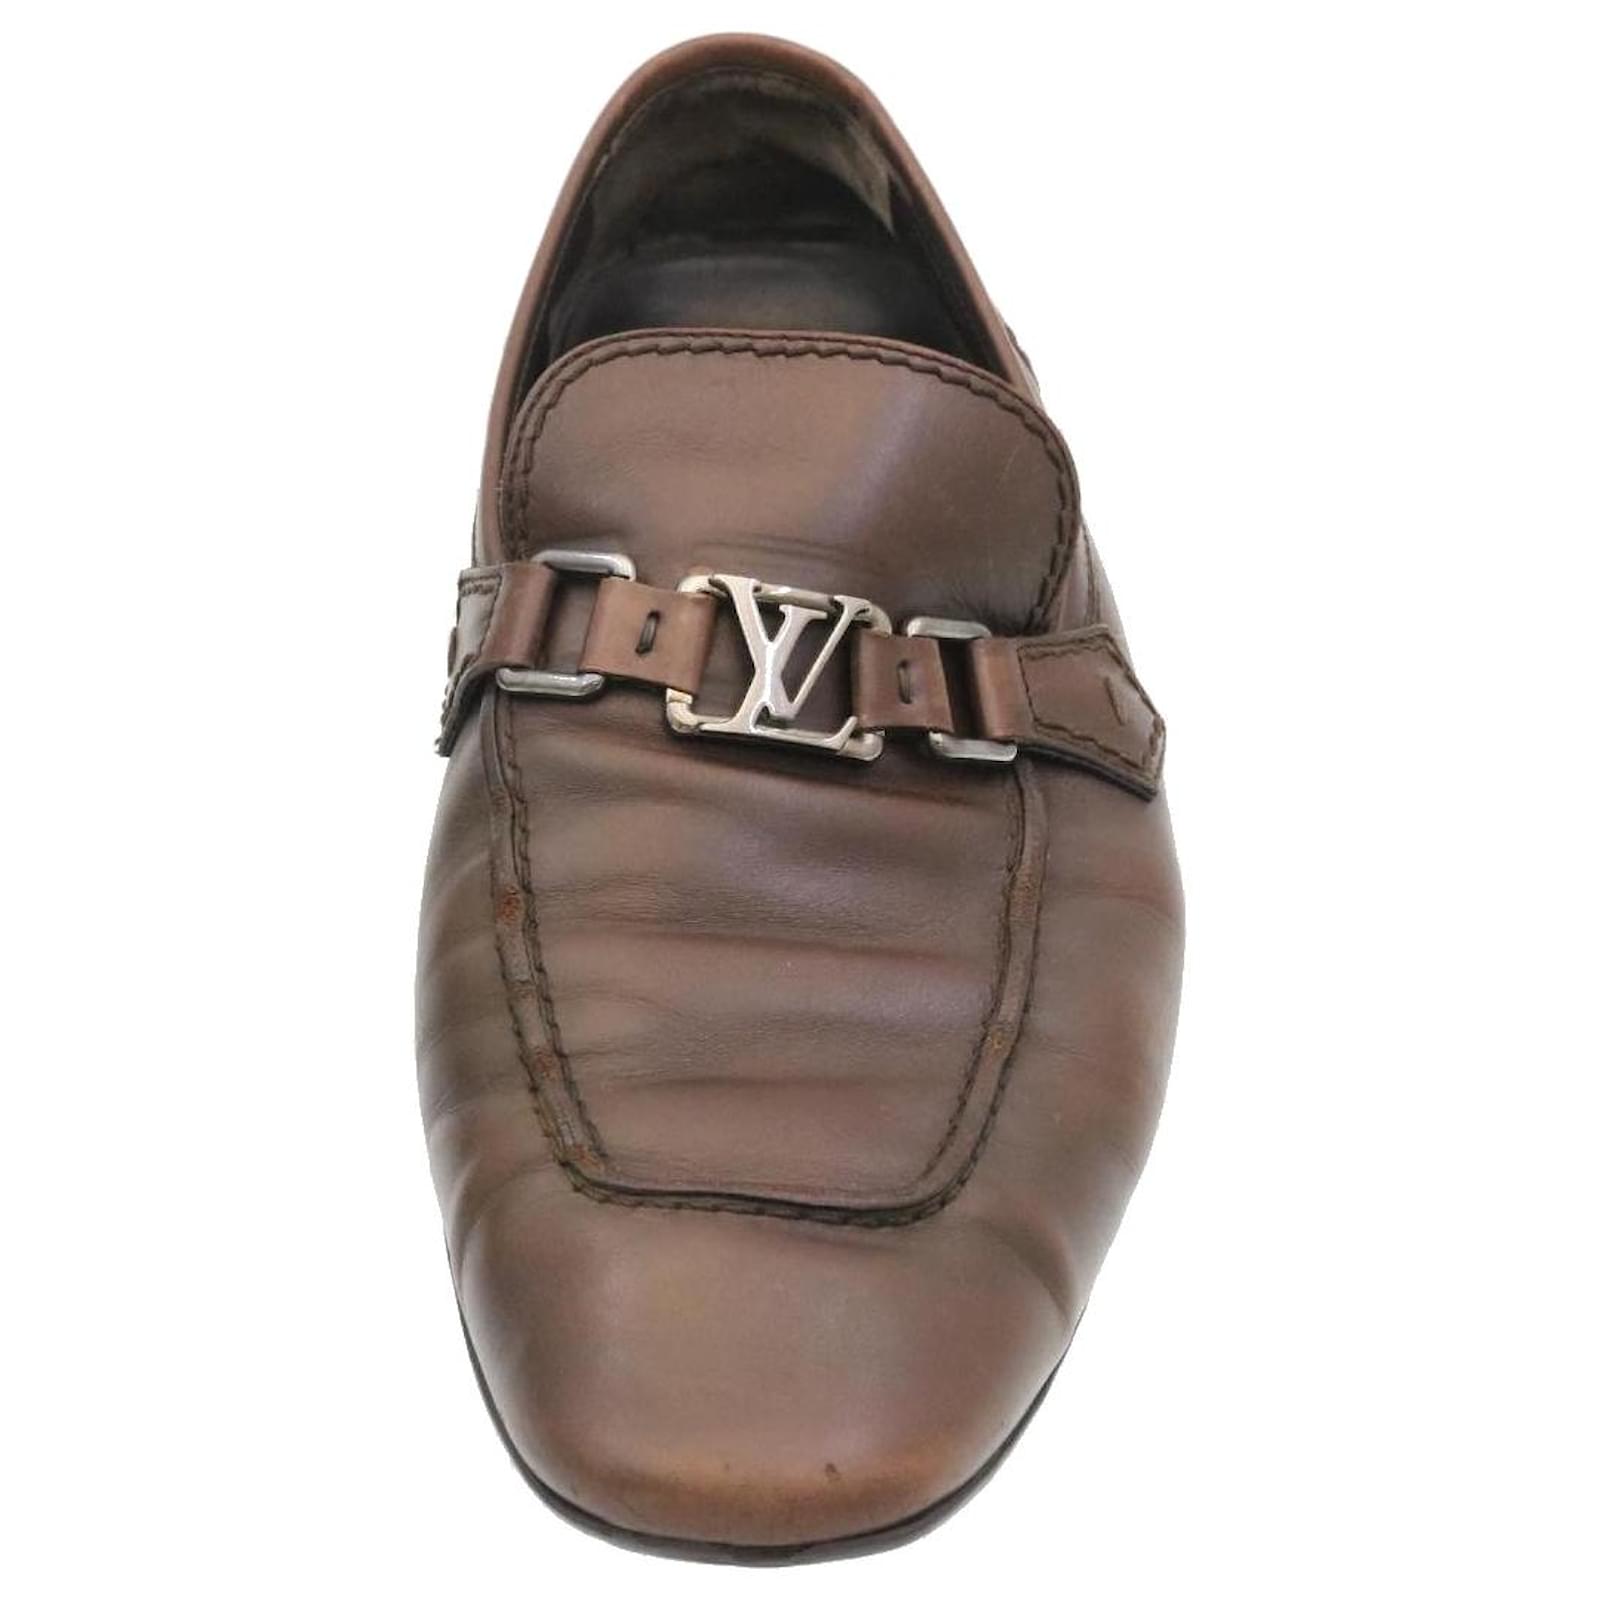 LOUIS VUITTON Driving shoes loafers Leather Brown LV Auth nh475